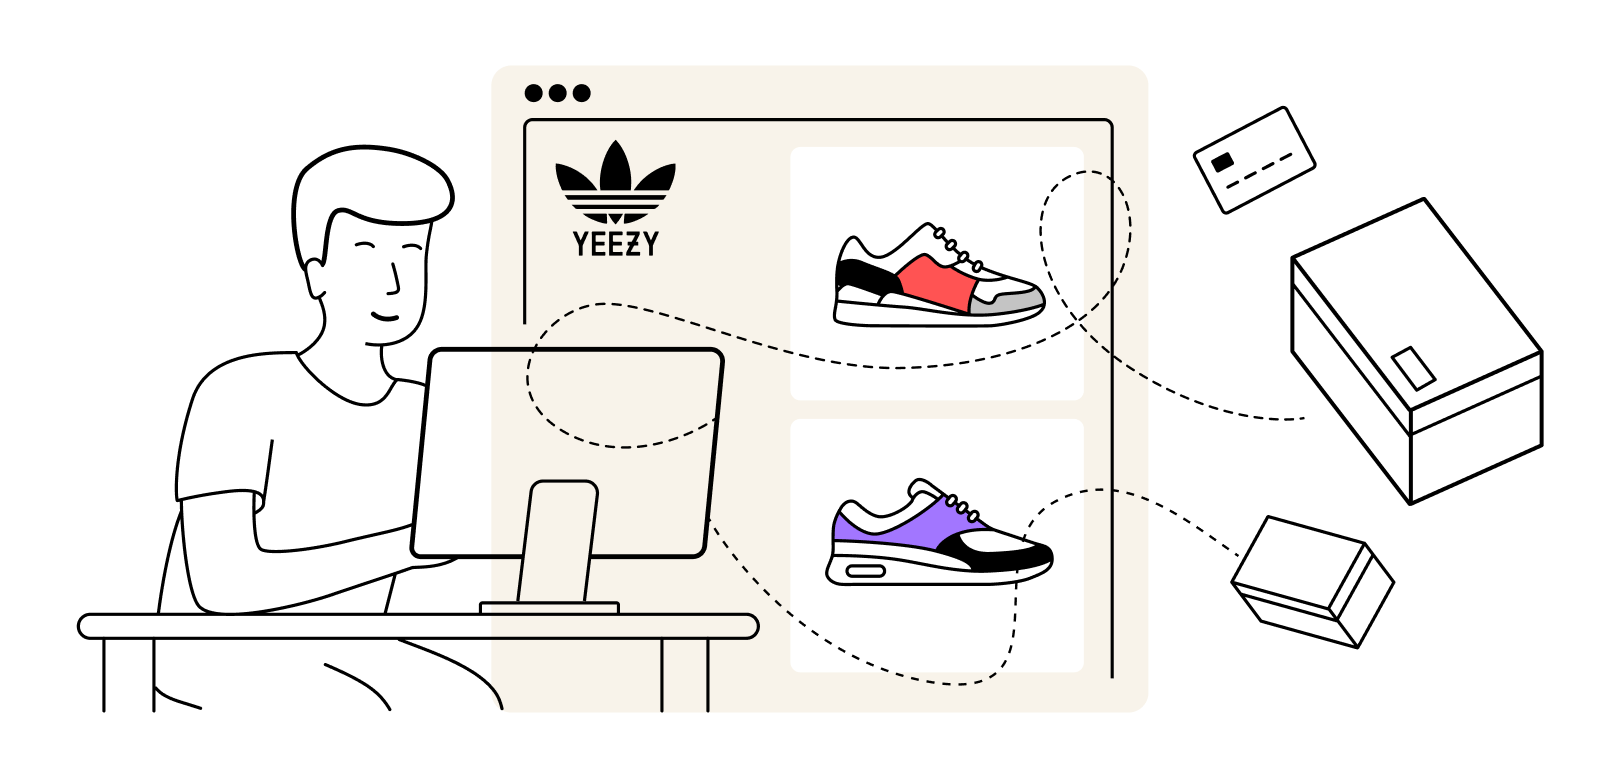 Should sneaker bots be banned? : r/AskALiberal